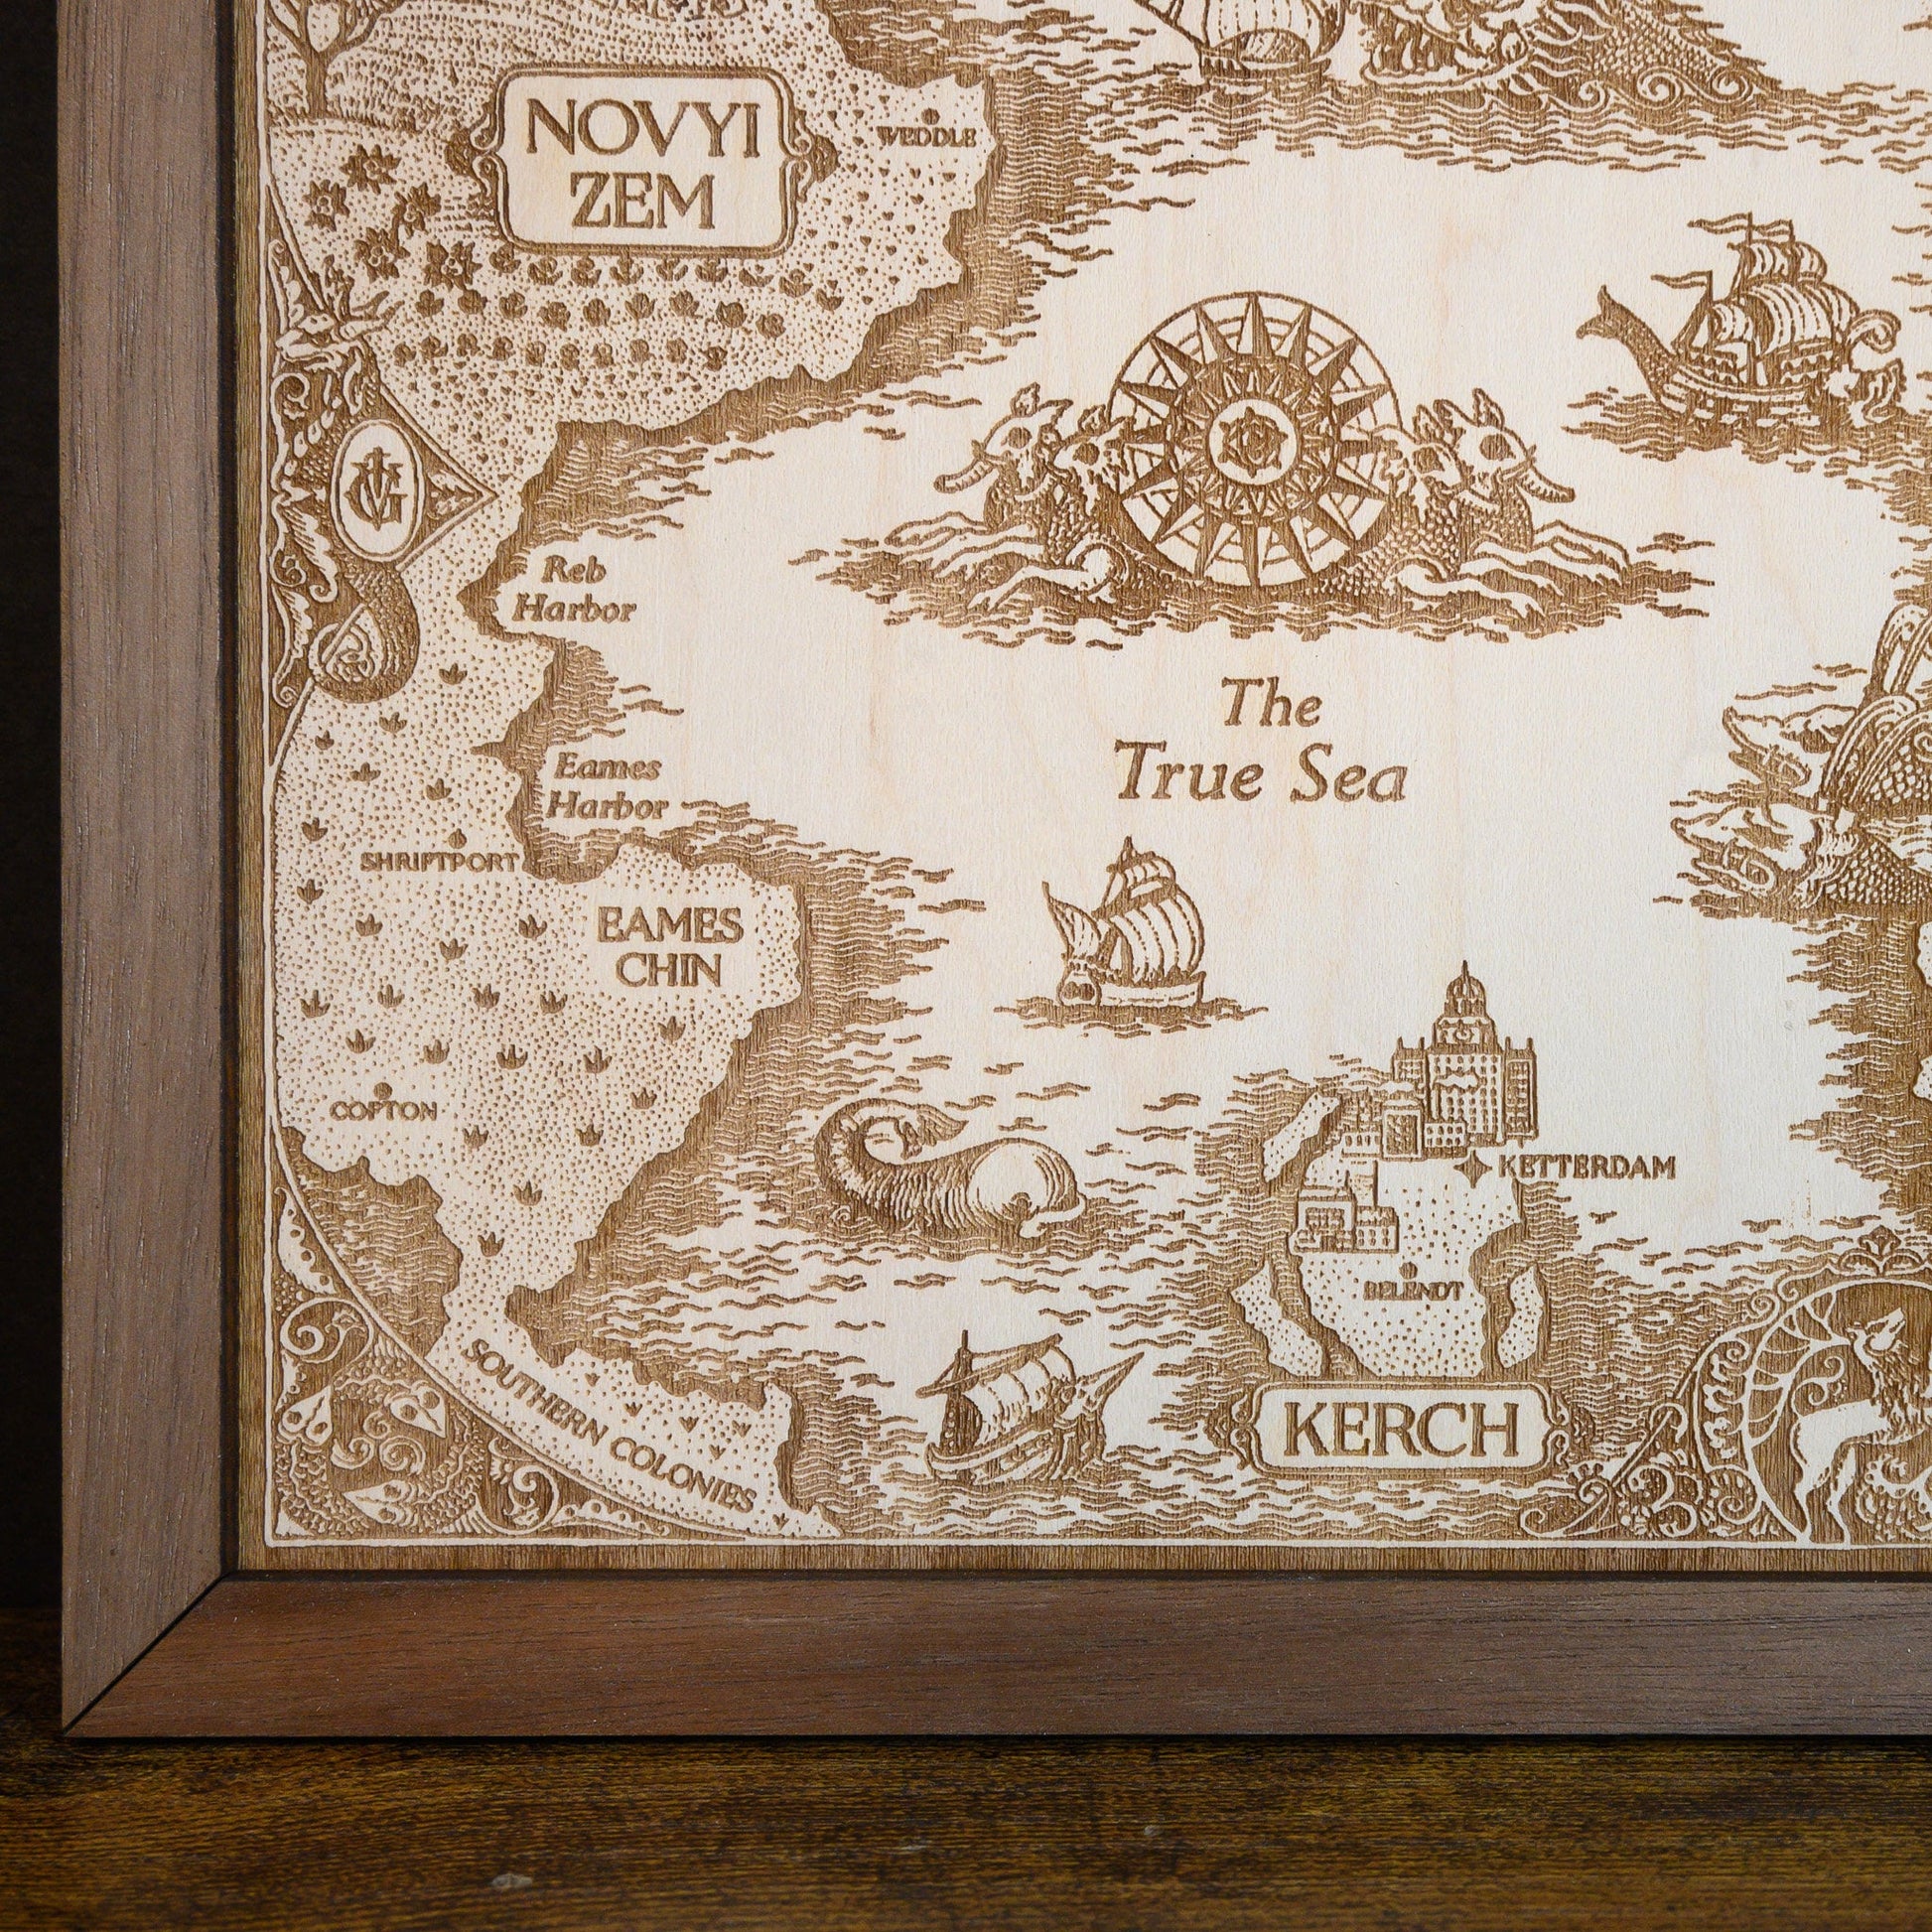 Grishaverse Map, Wood Engraved Map from Shadow and Bone